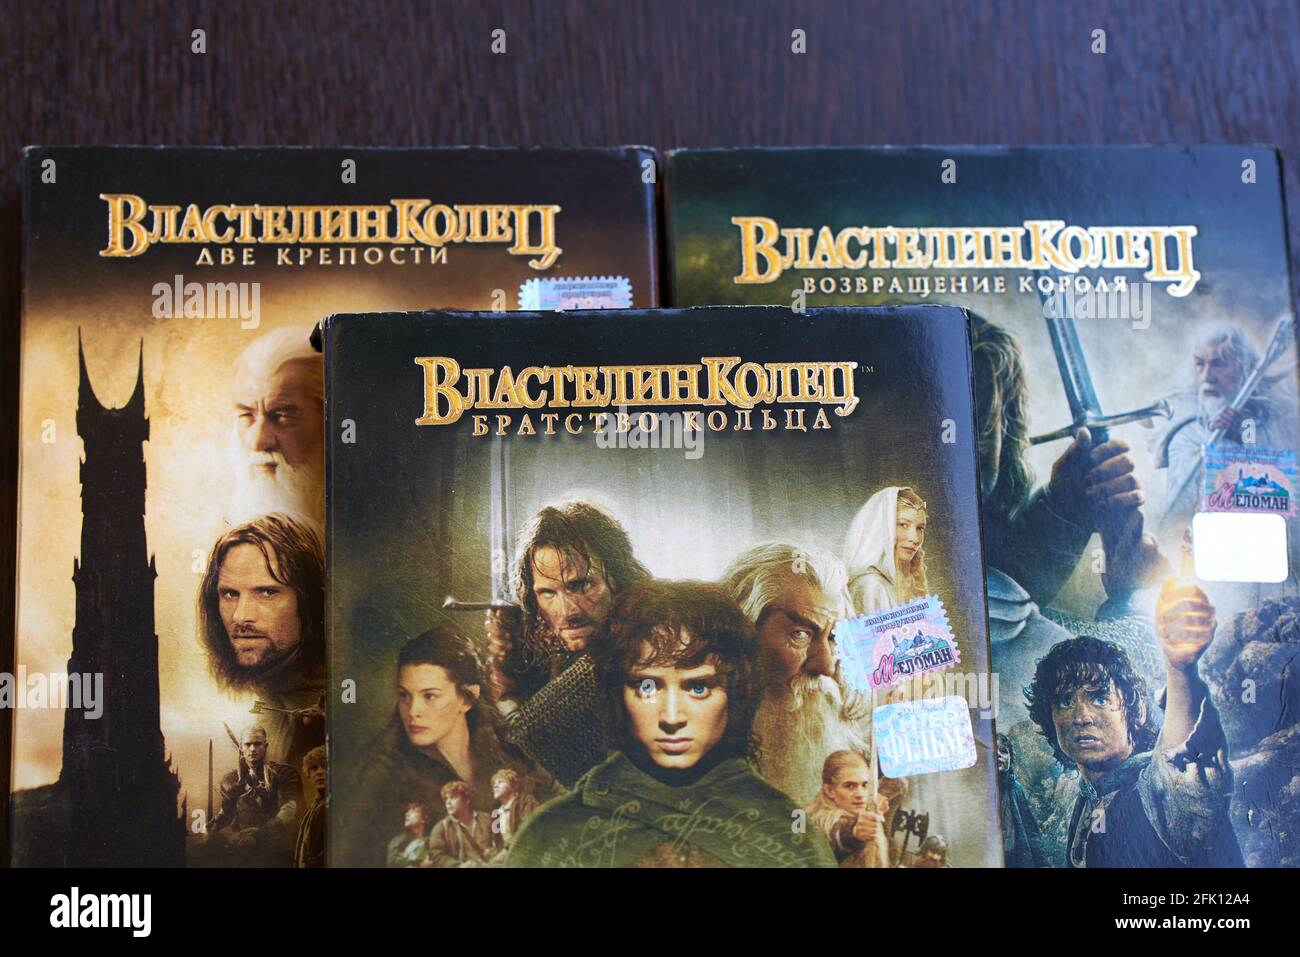 A collection of three discs with the Lord of the Rings movie in Russian Stock Photo